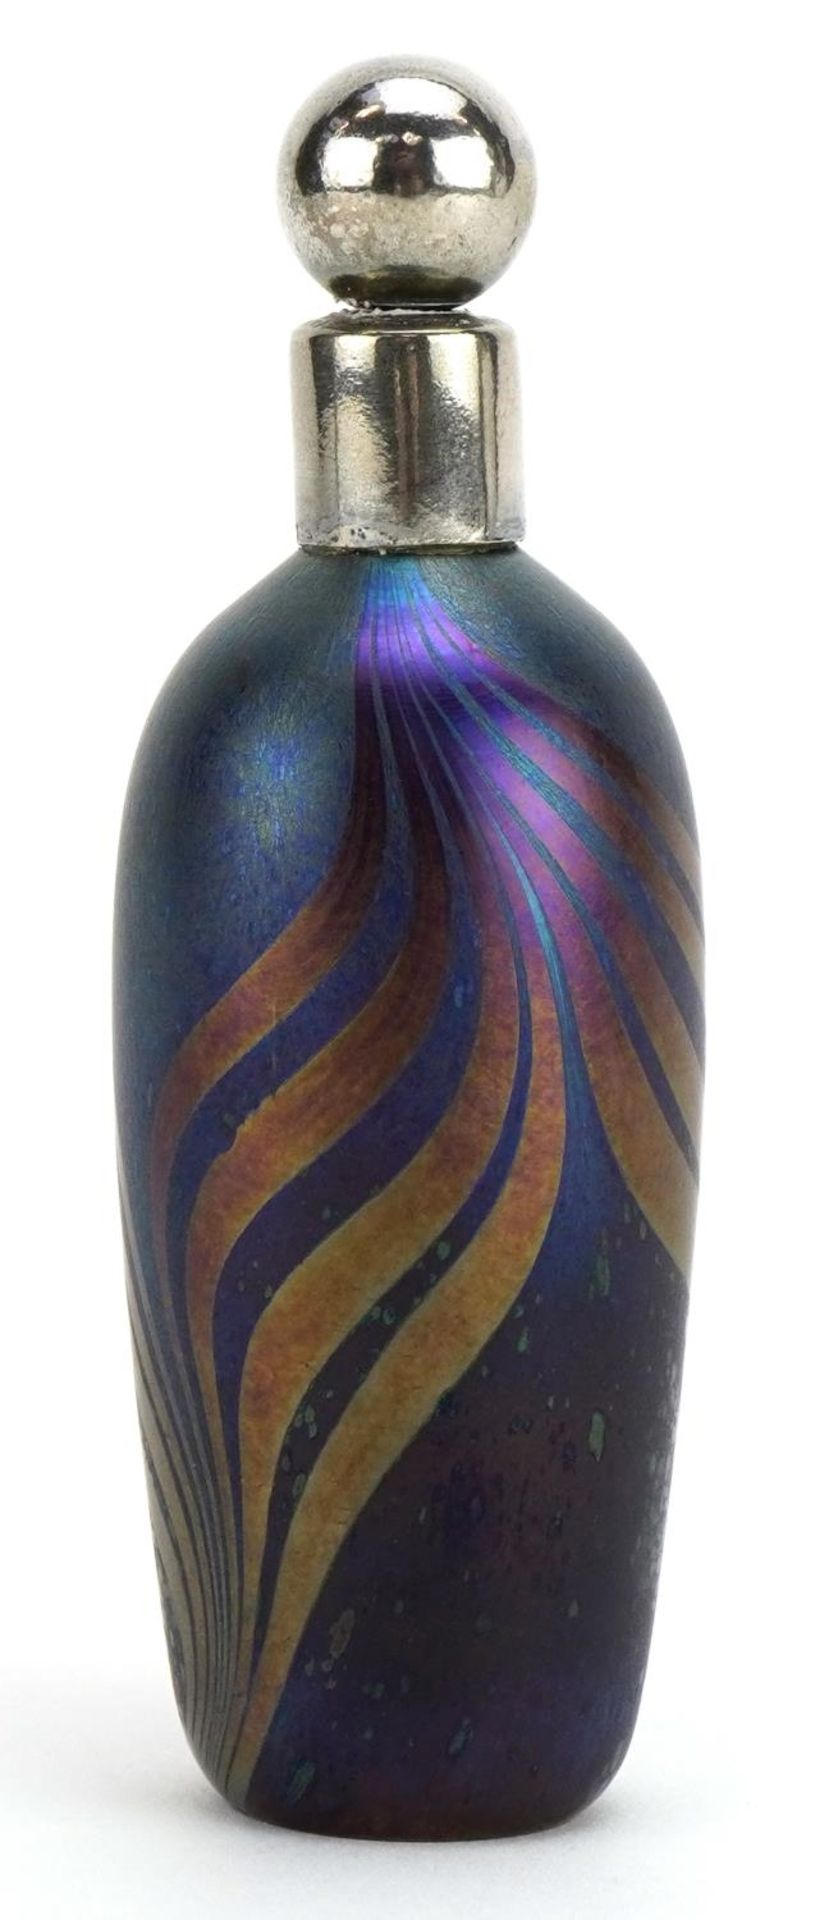 John Ditchfield, Glasform iridescent art glass scent bottle with combed decoration and white metal